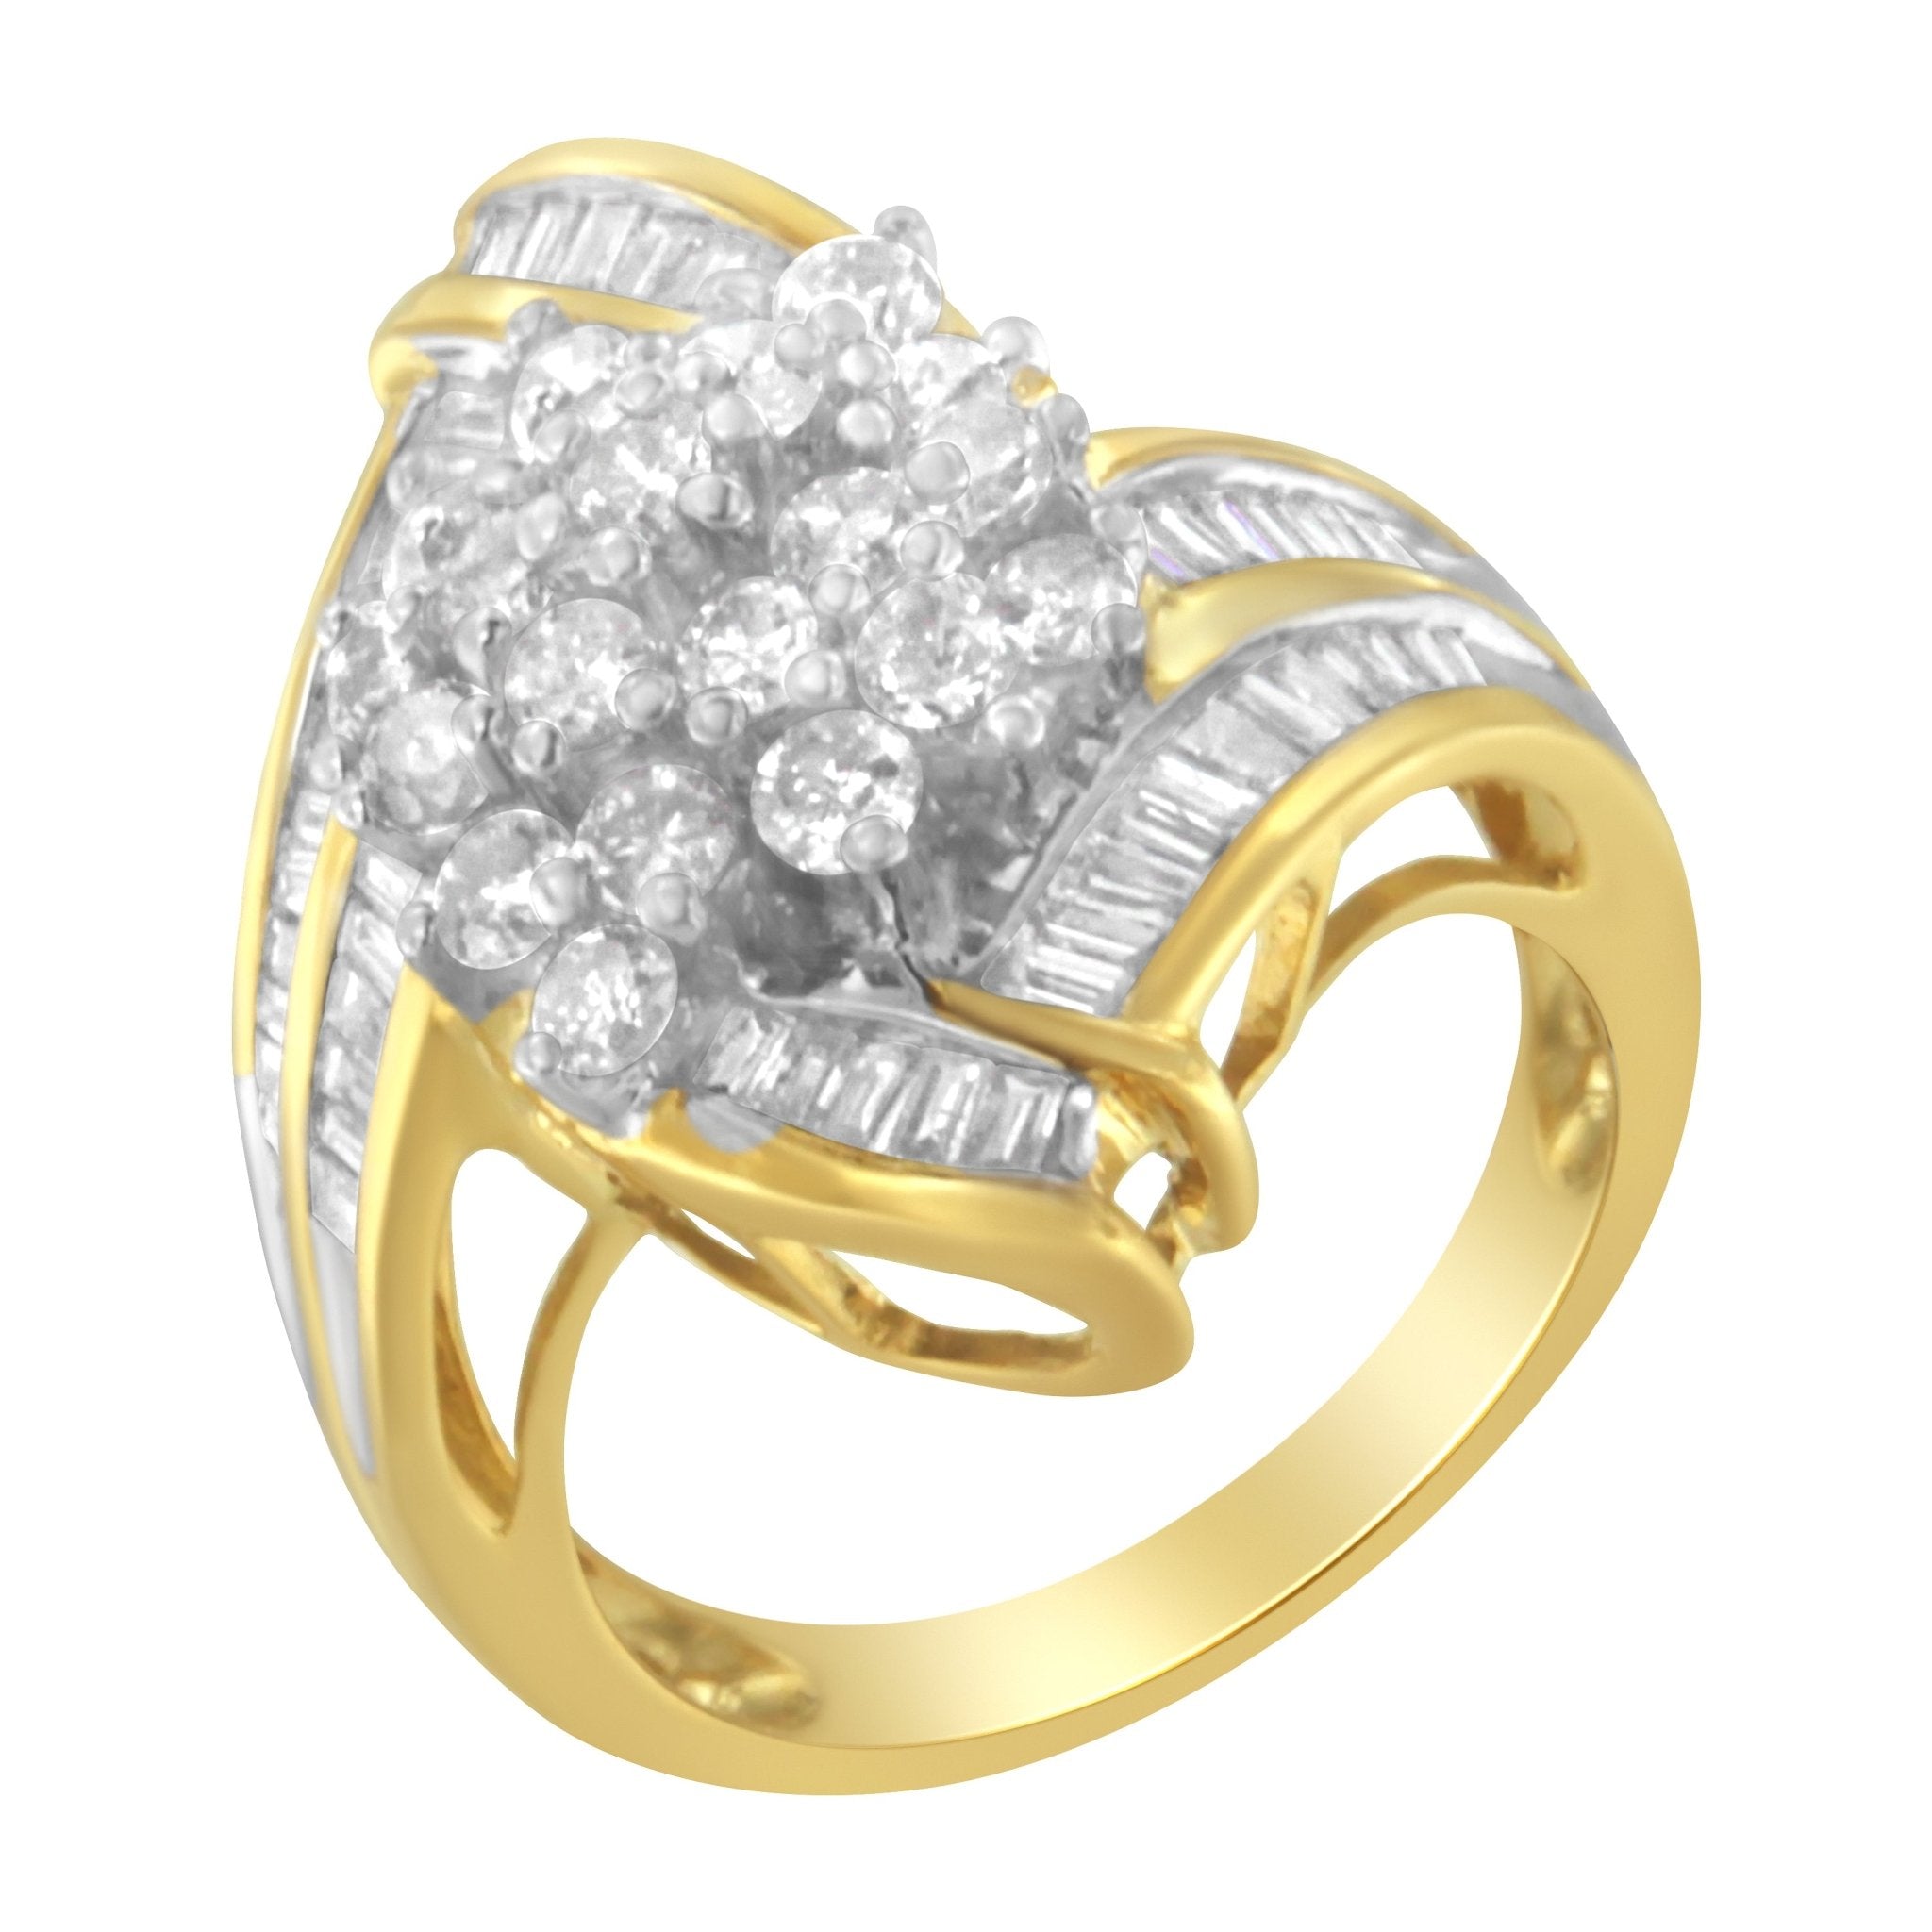 10K-Yellow-Gold-Round-And-Baguette-Diamond-Swirl-Ring-(2.0-Cttw,-J-K-Color,-I2-Clarity)-Size-7-1/4-Rings